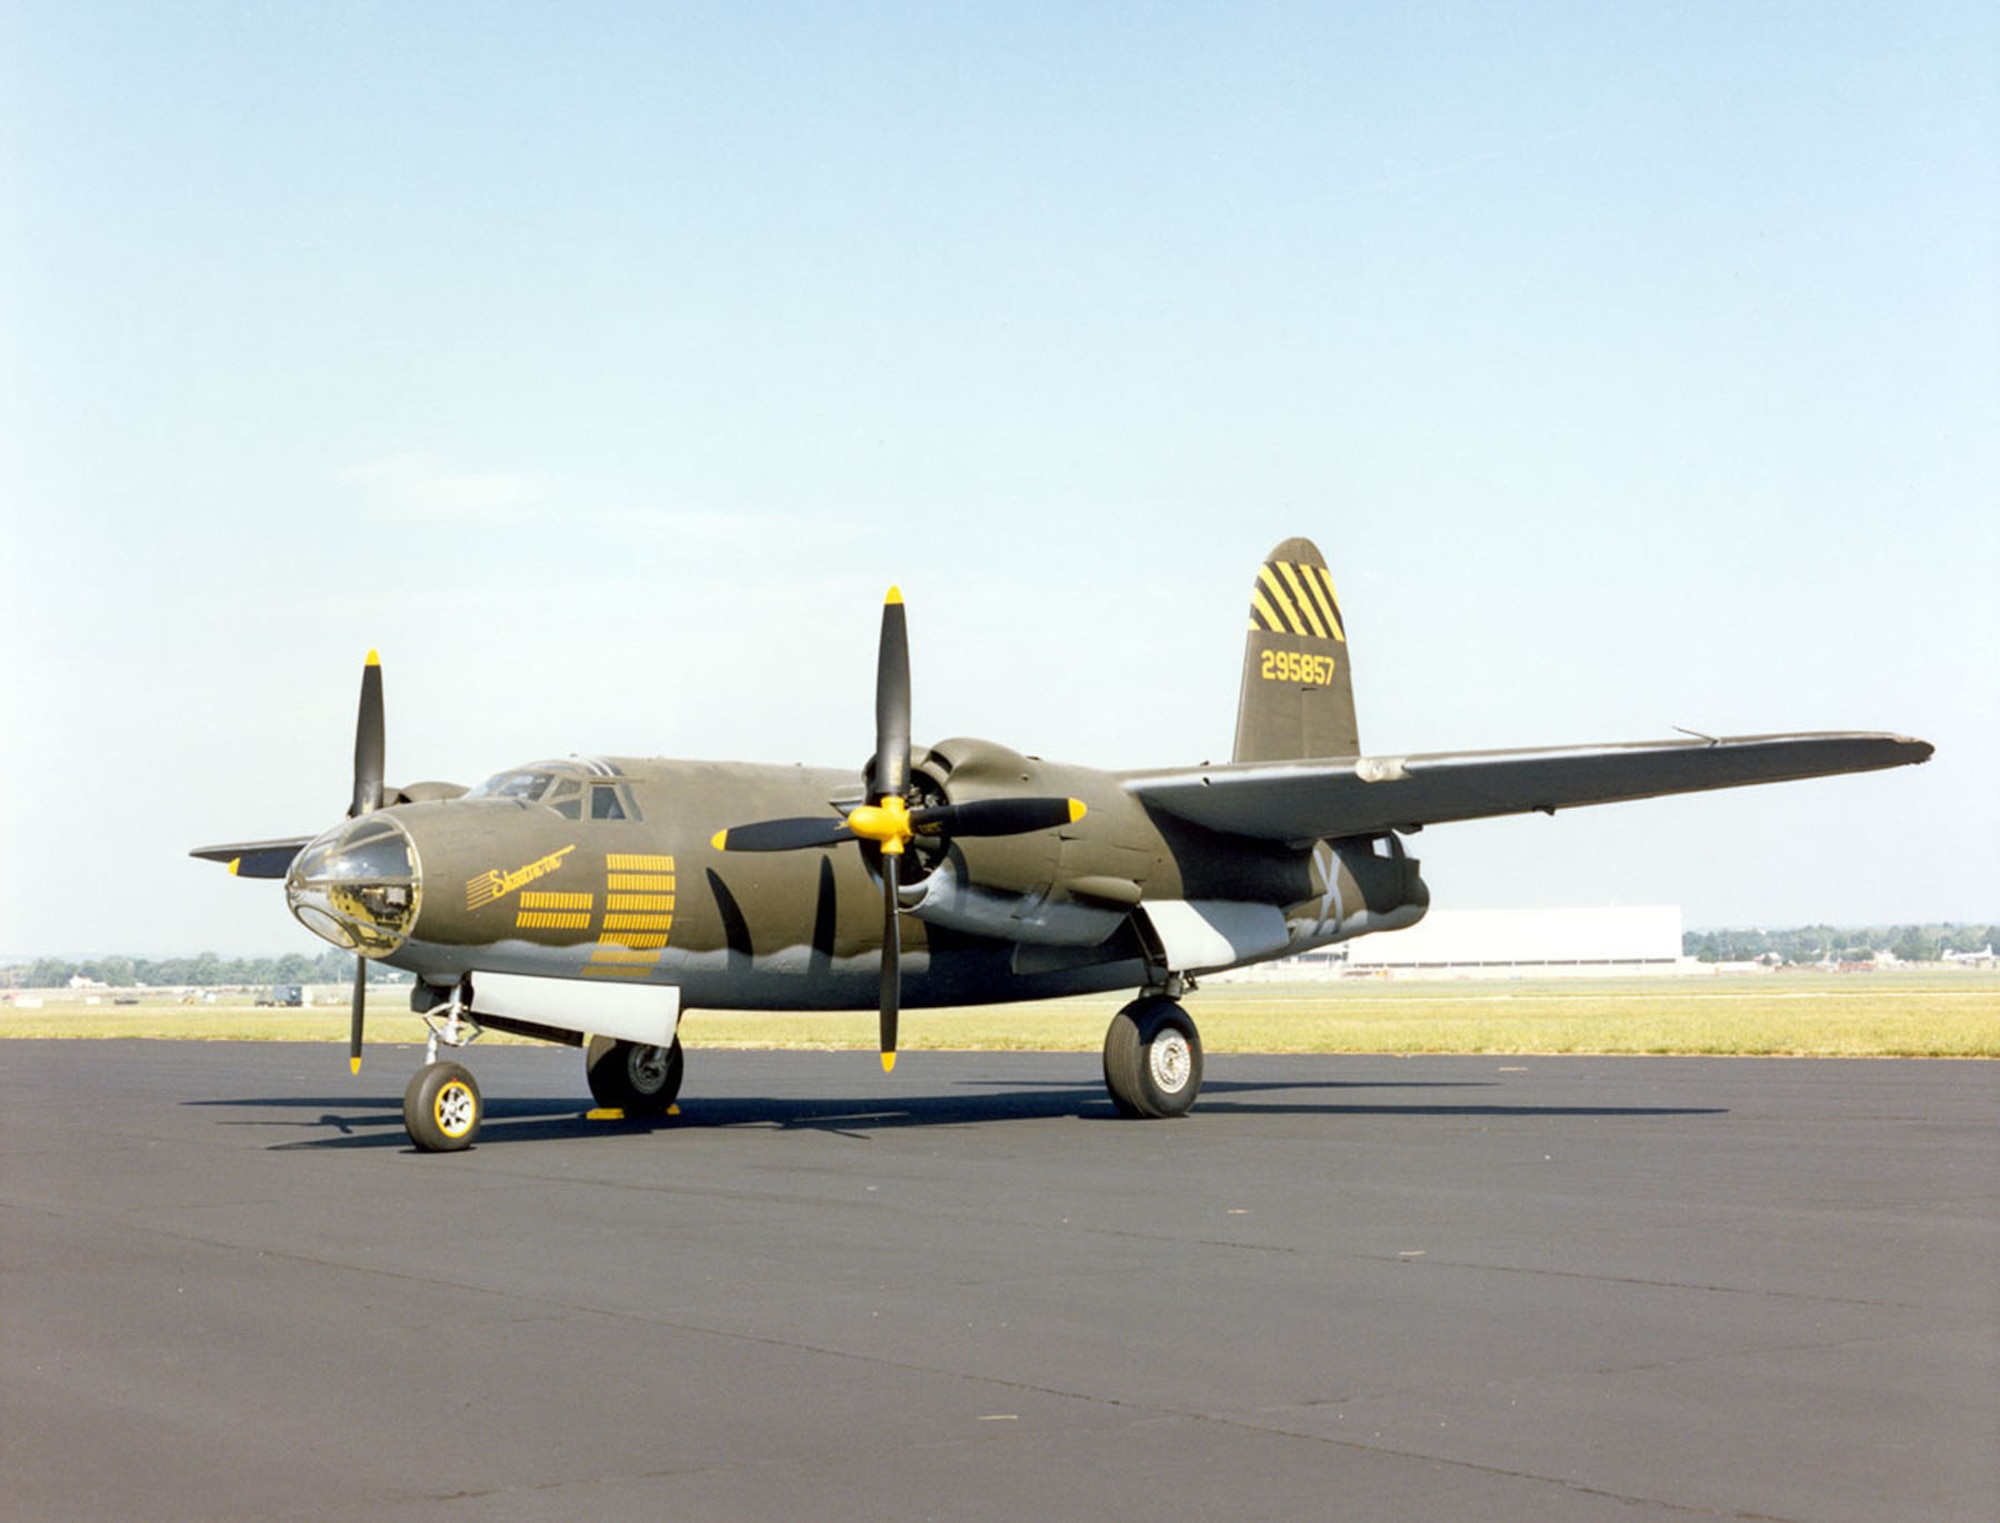 DAYTON, Ohio -- Martin B-26G Marauder at the National Museum of the United States Air Force. (U.S. Air Force photo)